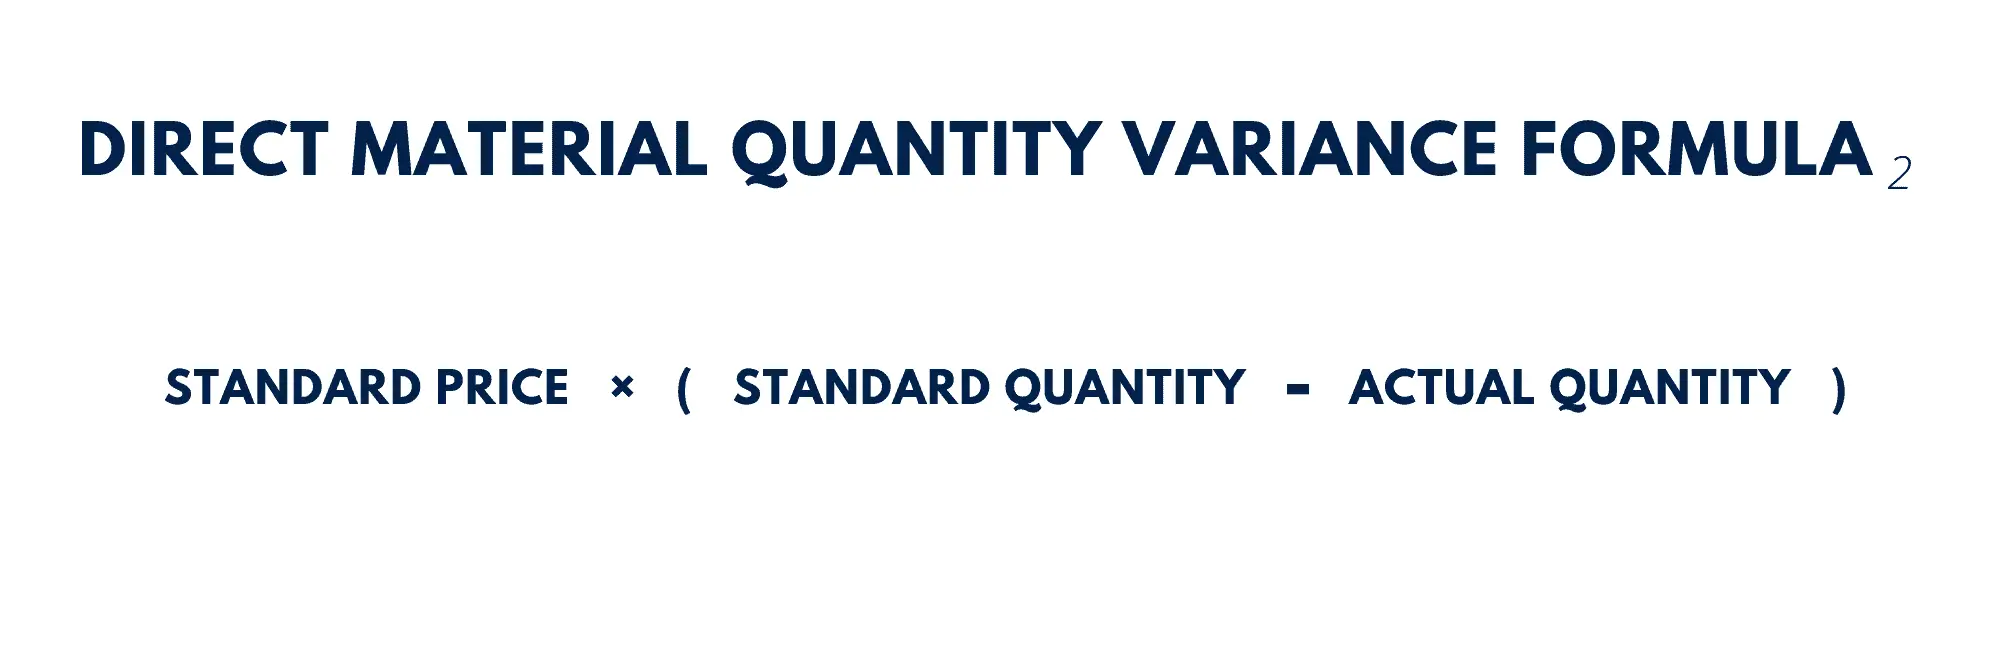 Direct Material Quantity Variance = Standard Price × (Standard Quantity - Actual Quantity)